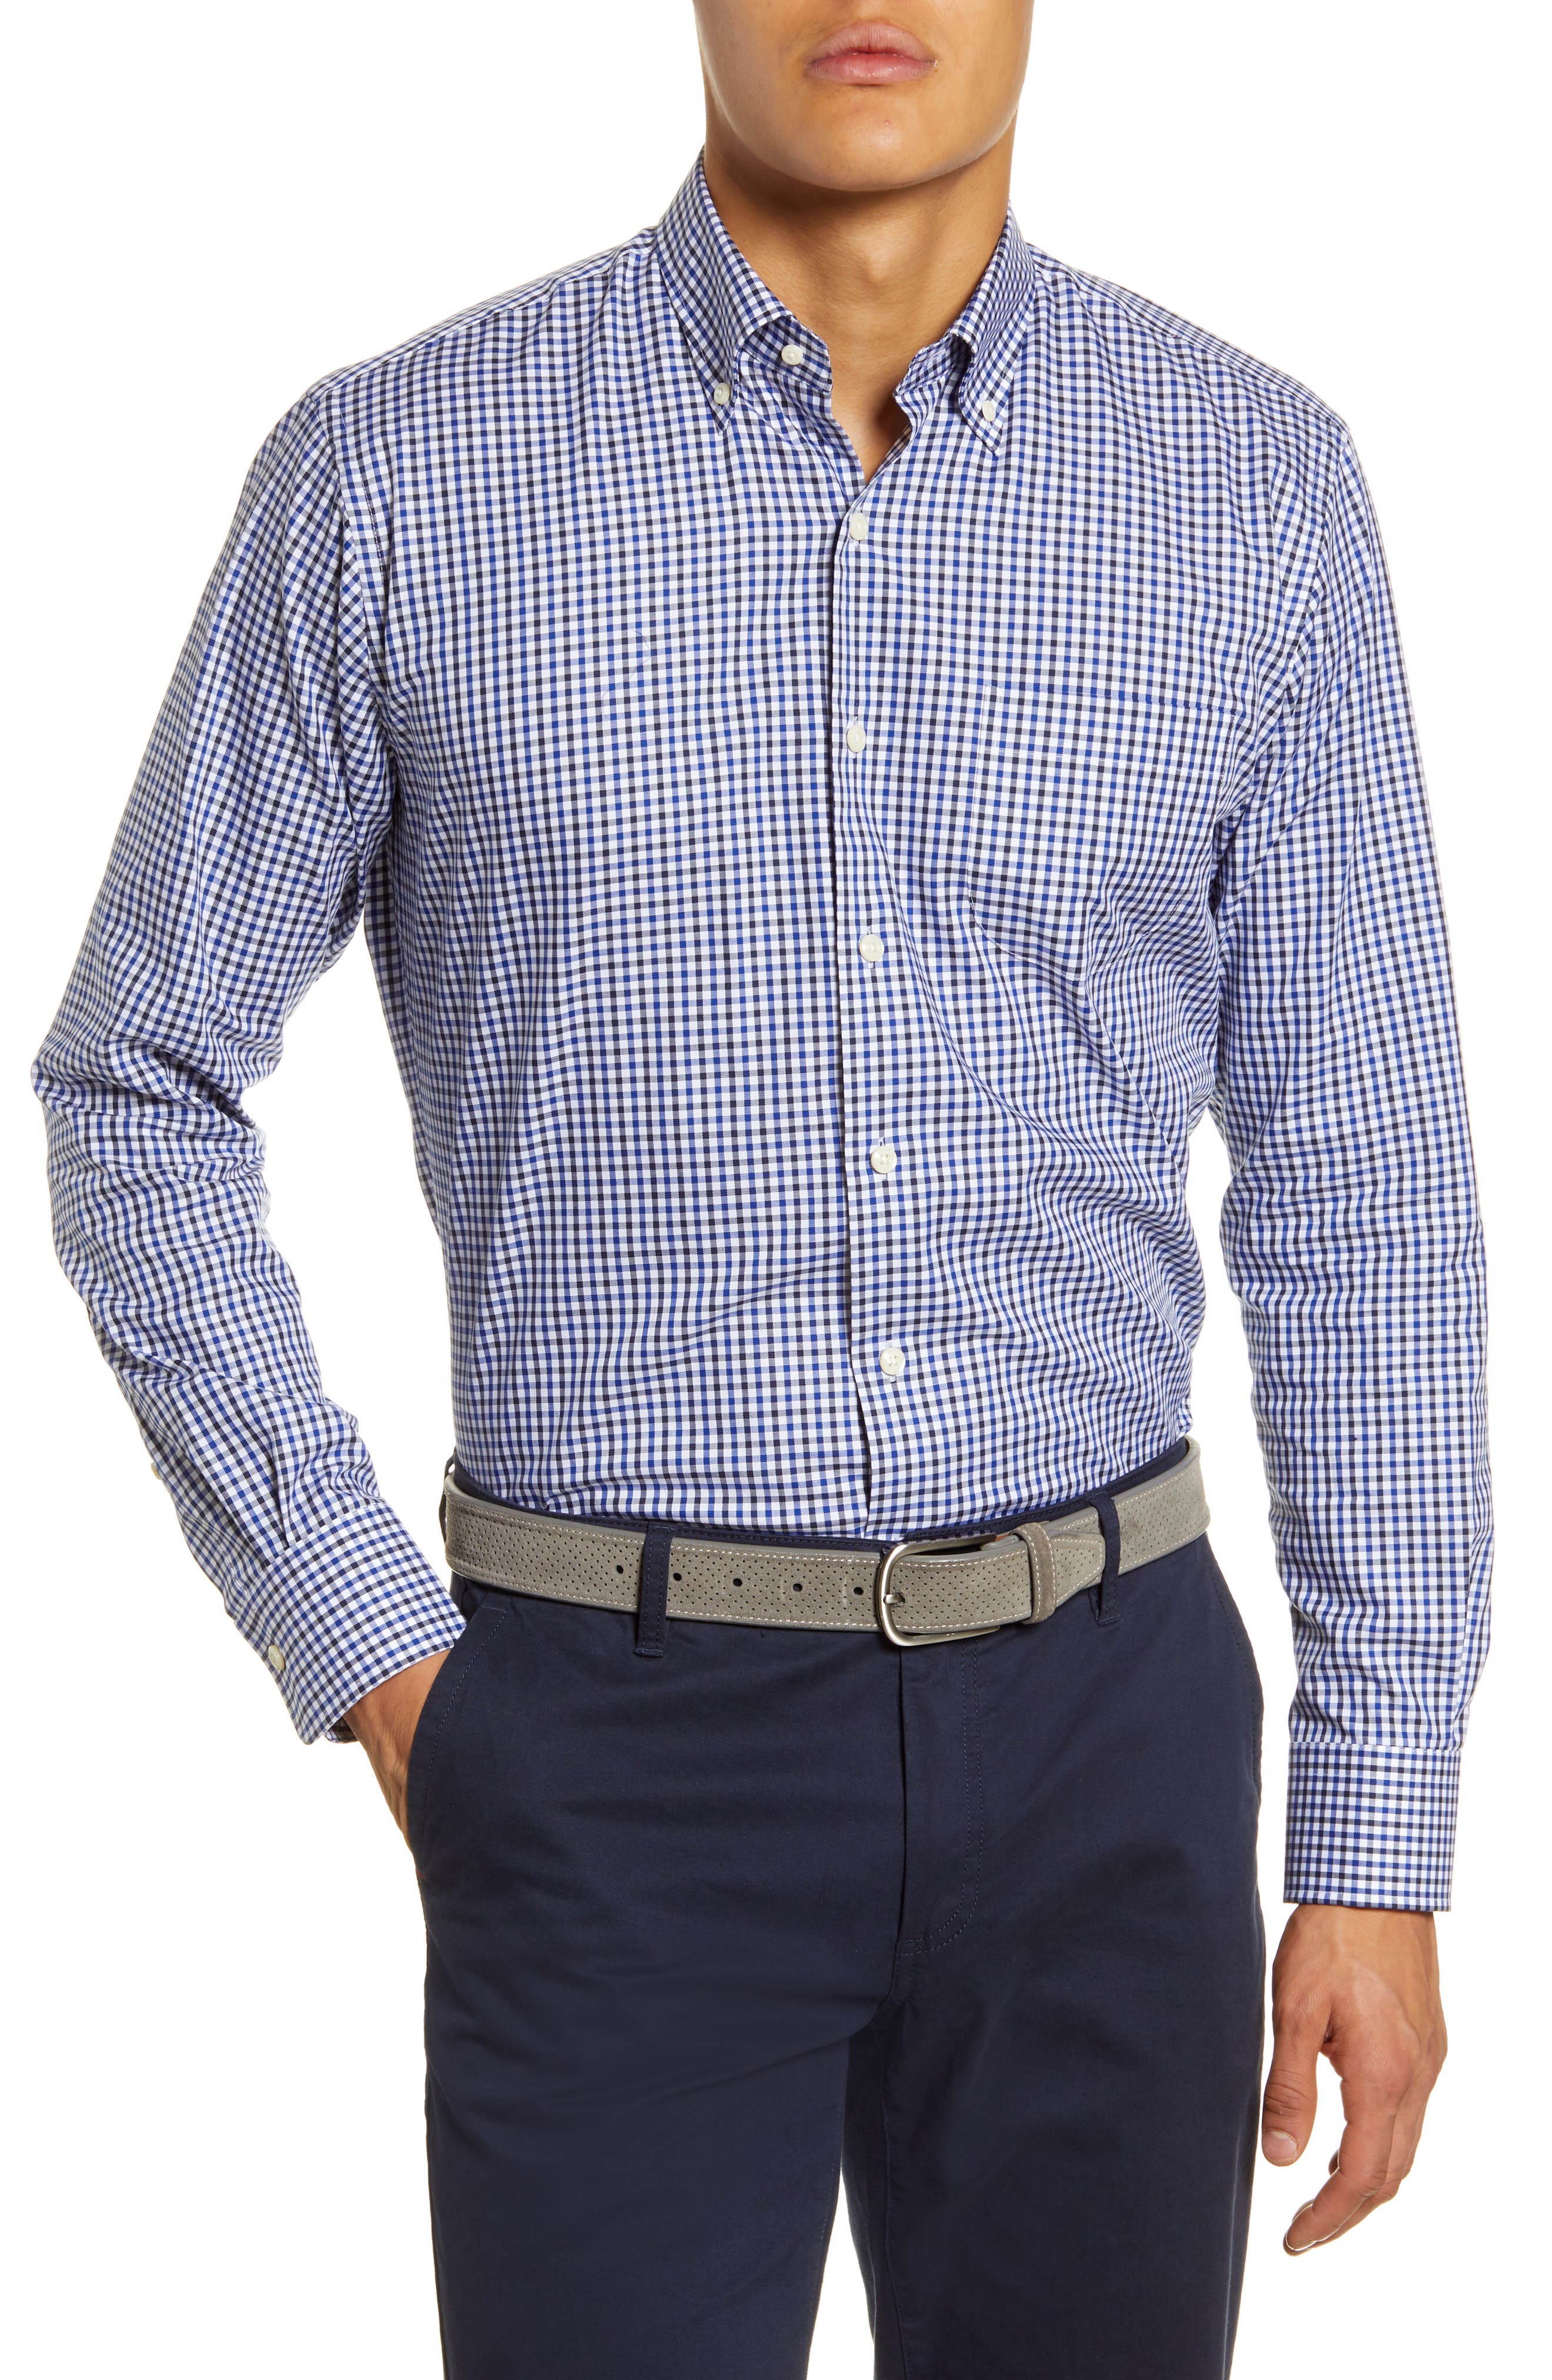 219 business casual mens